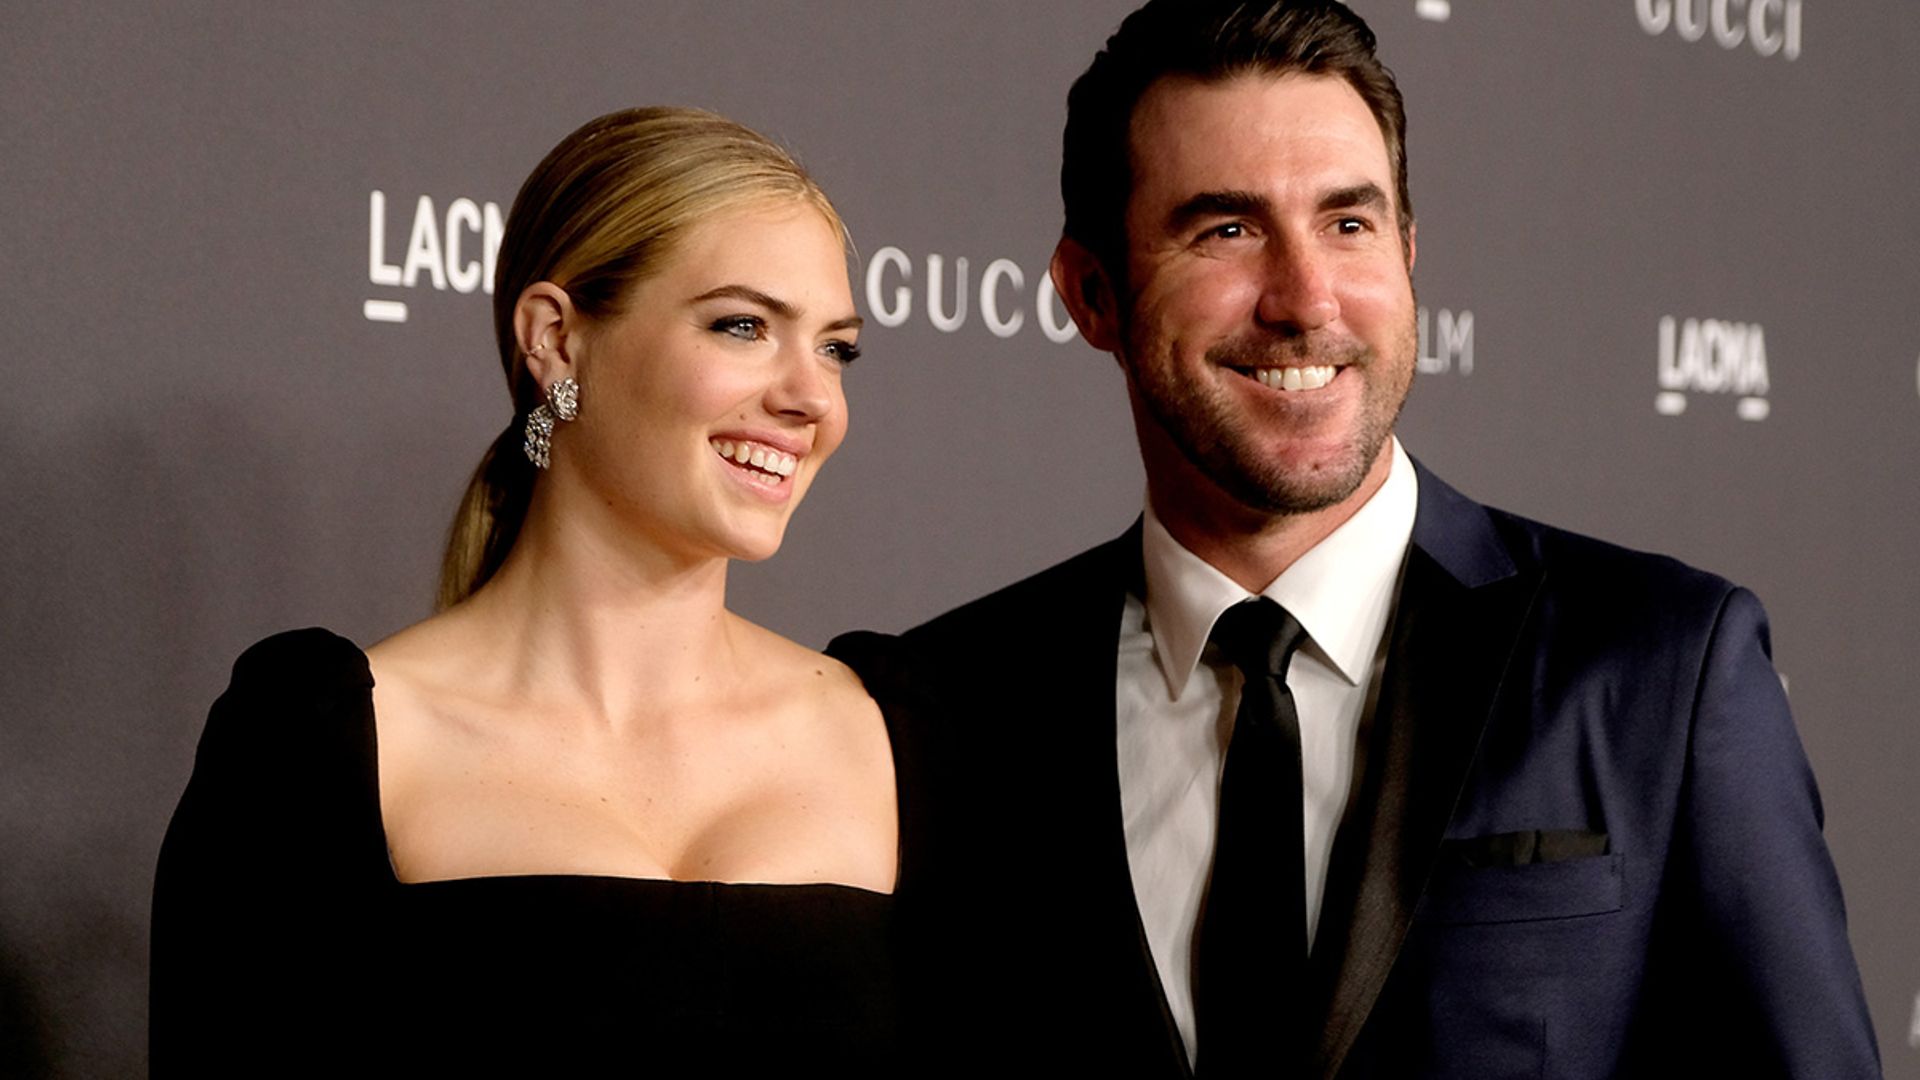 Kate Upton delights fans with rare family photo of little daughter Genevieve